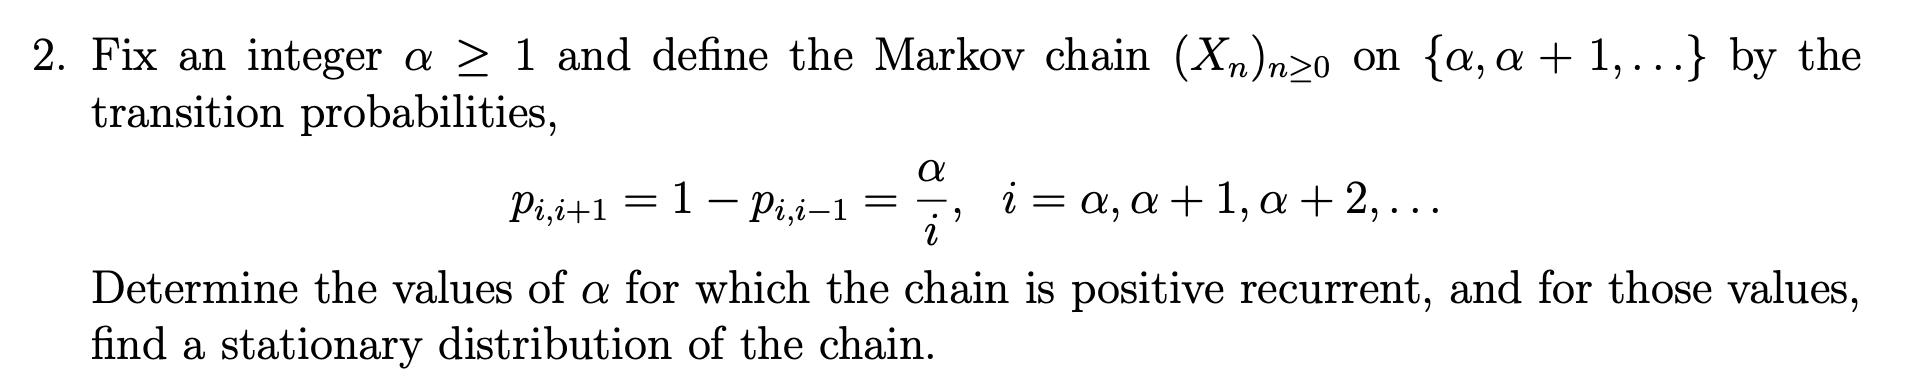 2. Fix an integer a > 1 and define the Markov chain (Xn)n>0 on {, a + 1, ...} by the transition probabilities, Pi,i+1 = 